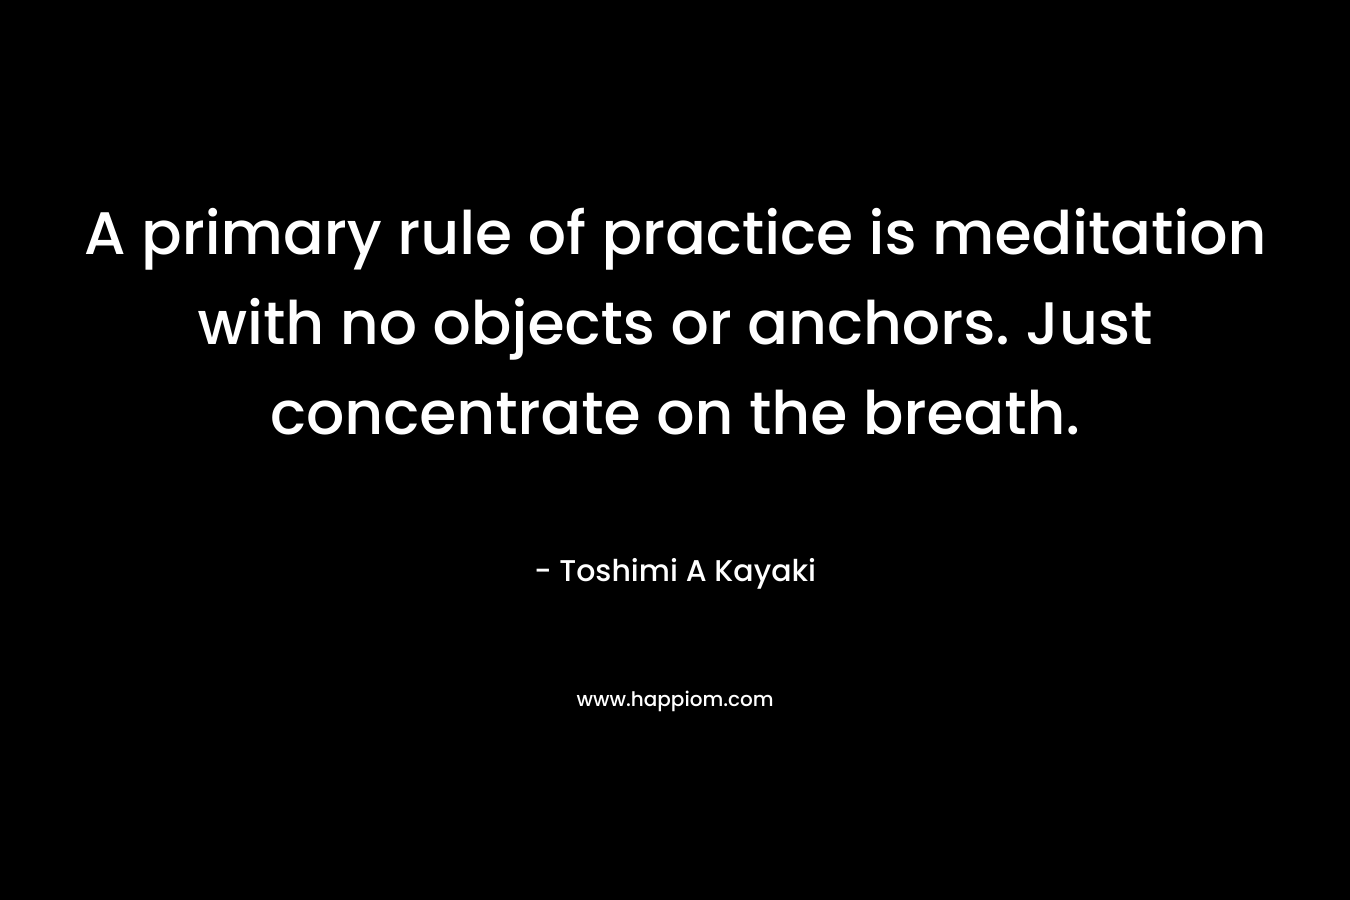 A primary rule of practice is meditation with no objects or anchors. Just concentrate on the breath.